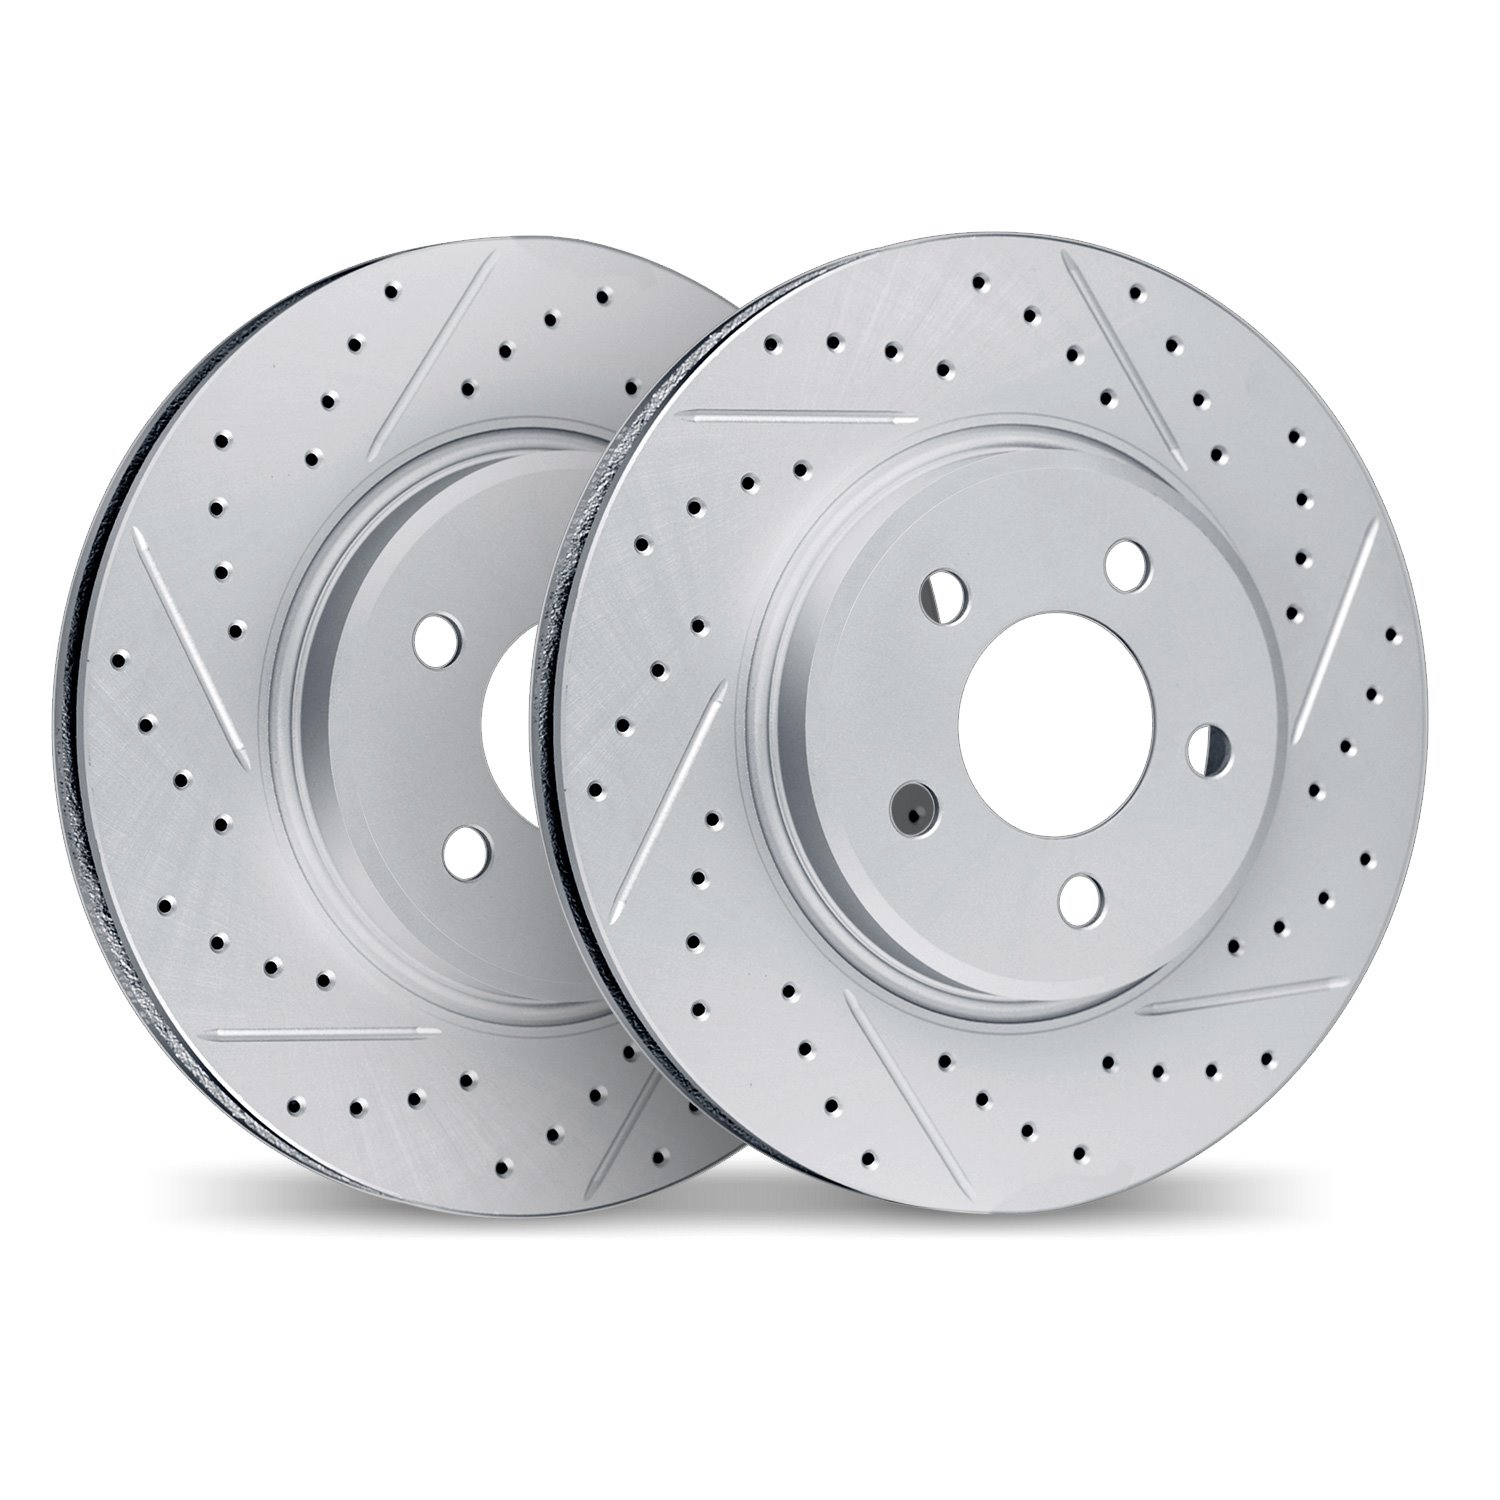 2002-54104 Geoperformance Drilled/Slotted Brake Rotors, 1998-2002 Ford/Lincoln/Mercury/Mazda, Position: Front